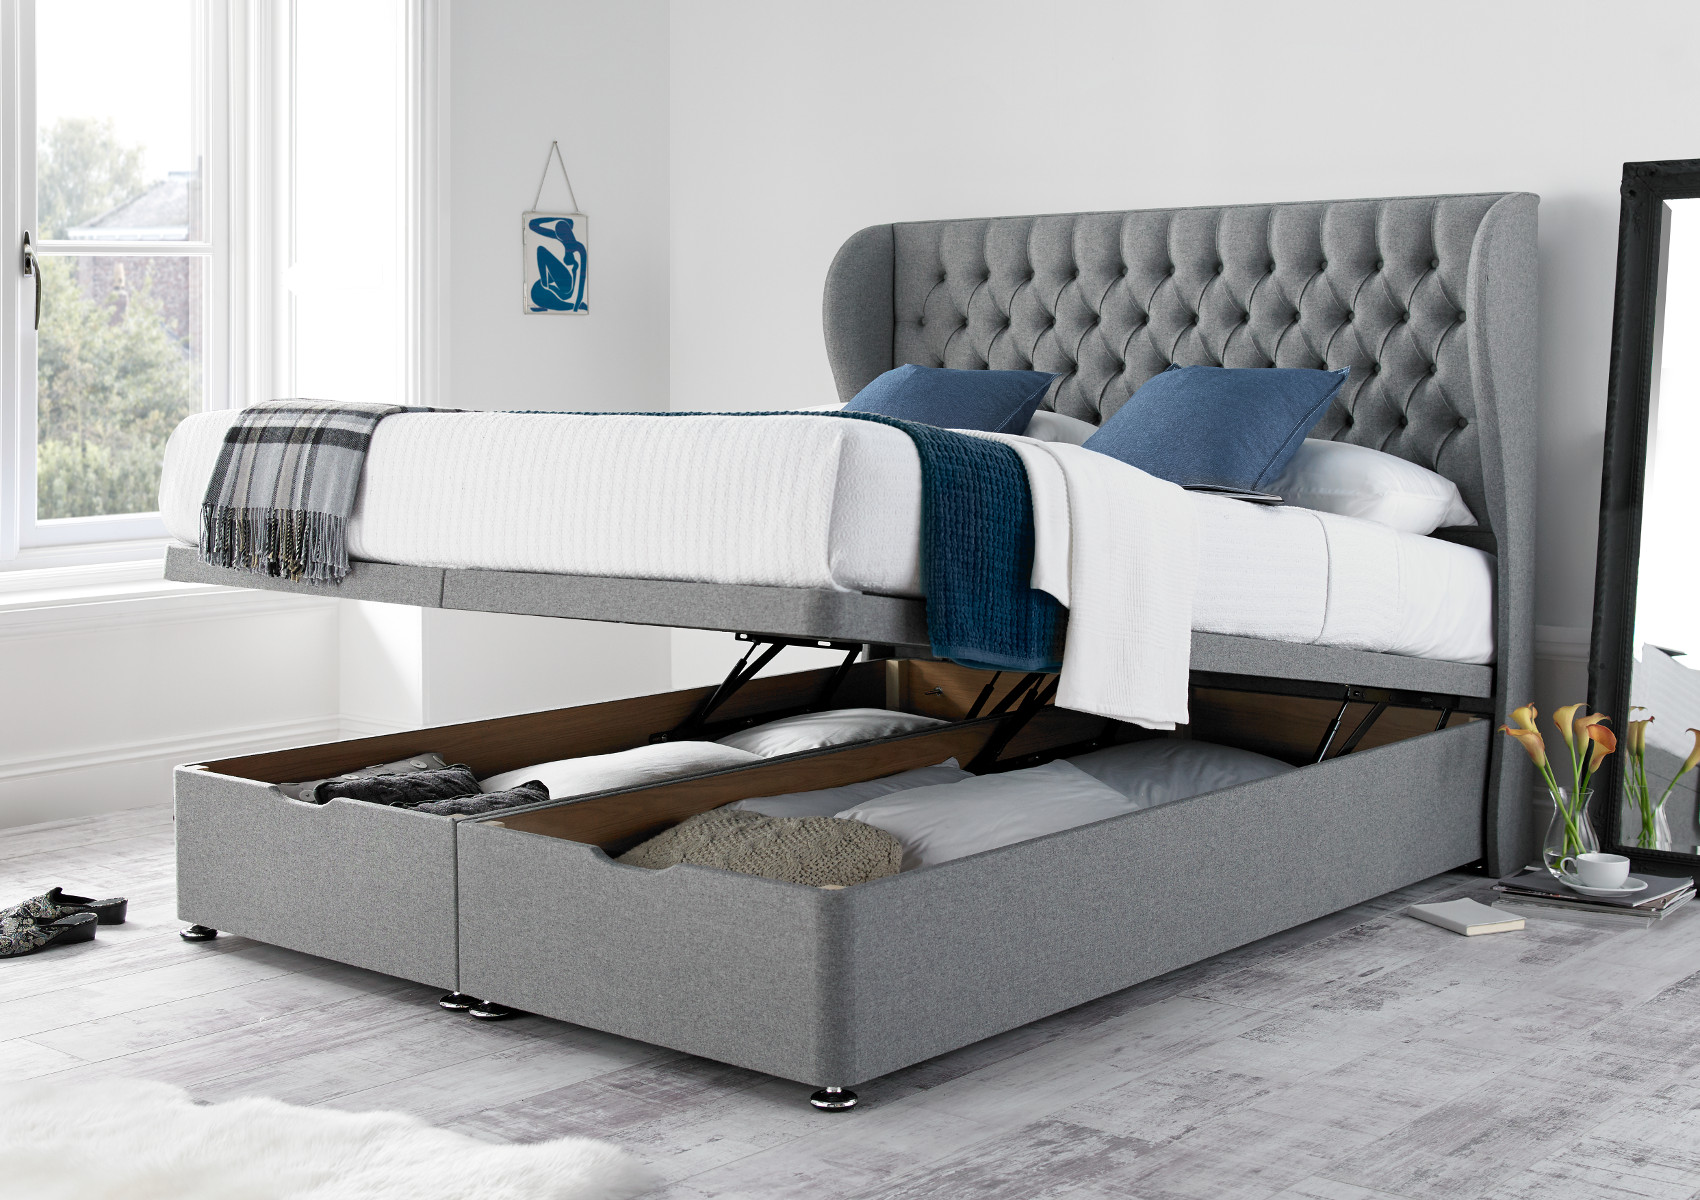 View Chesterfield Naples Silver Upholstered Double Ottoman Bed Time4Sleep information